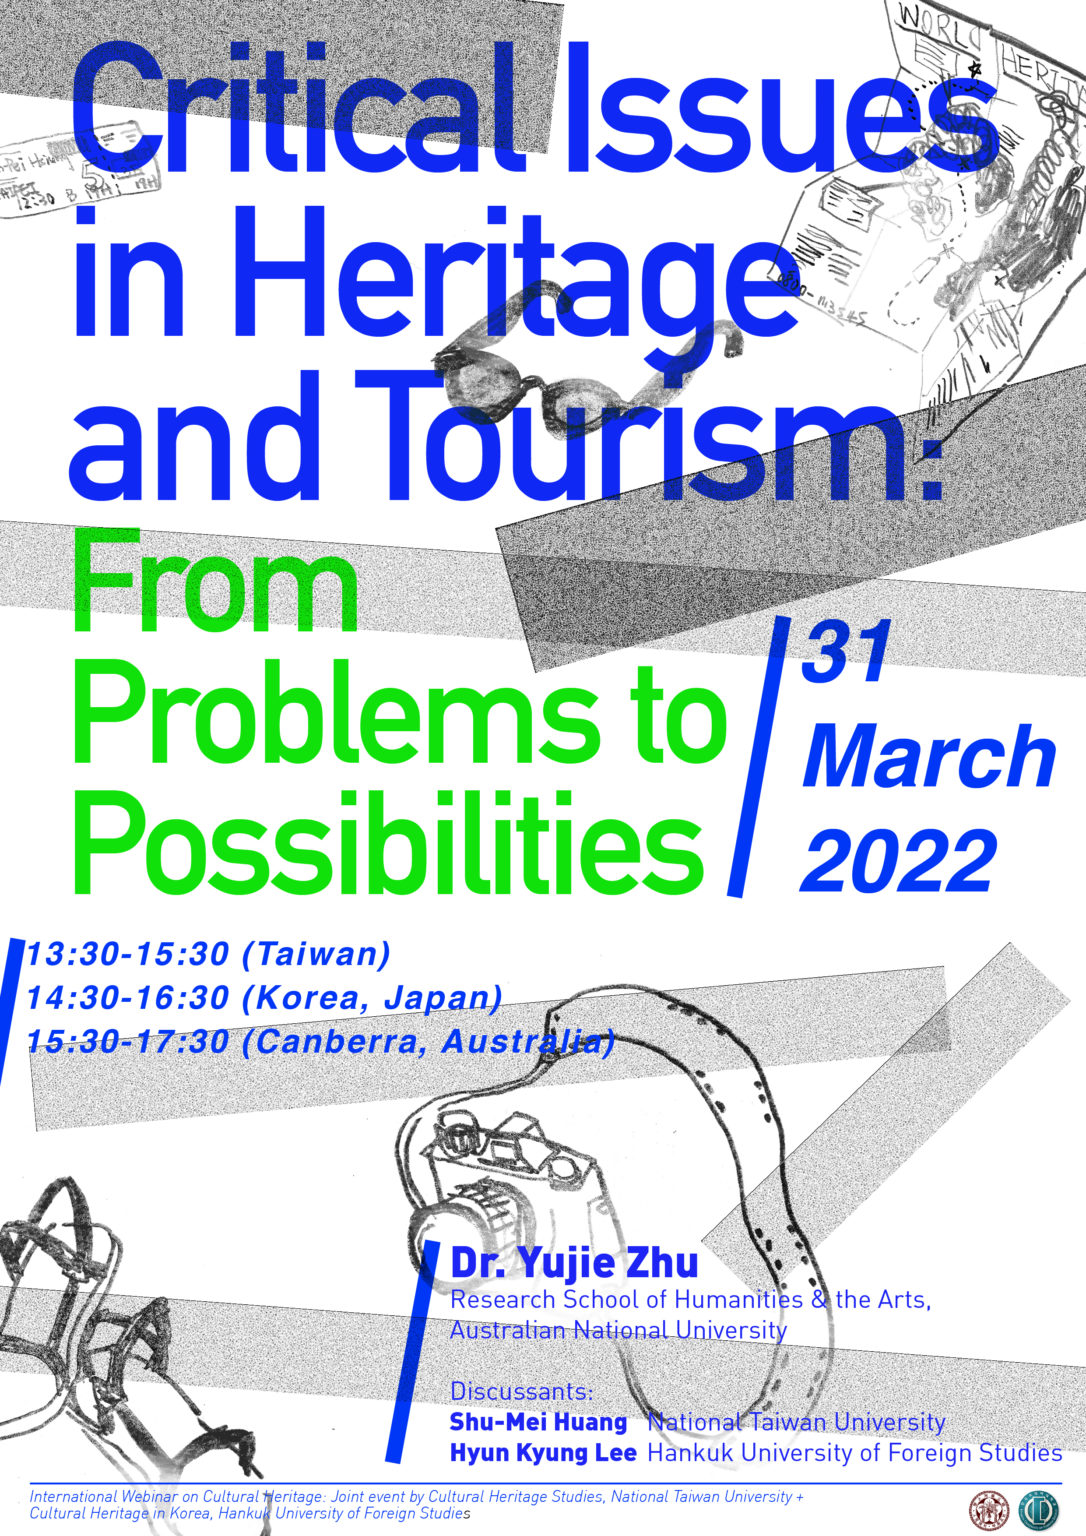 heritage tourism from problems to possibilities